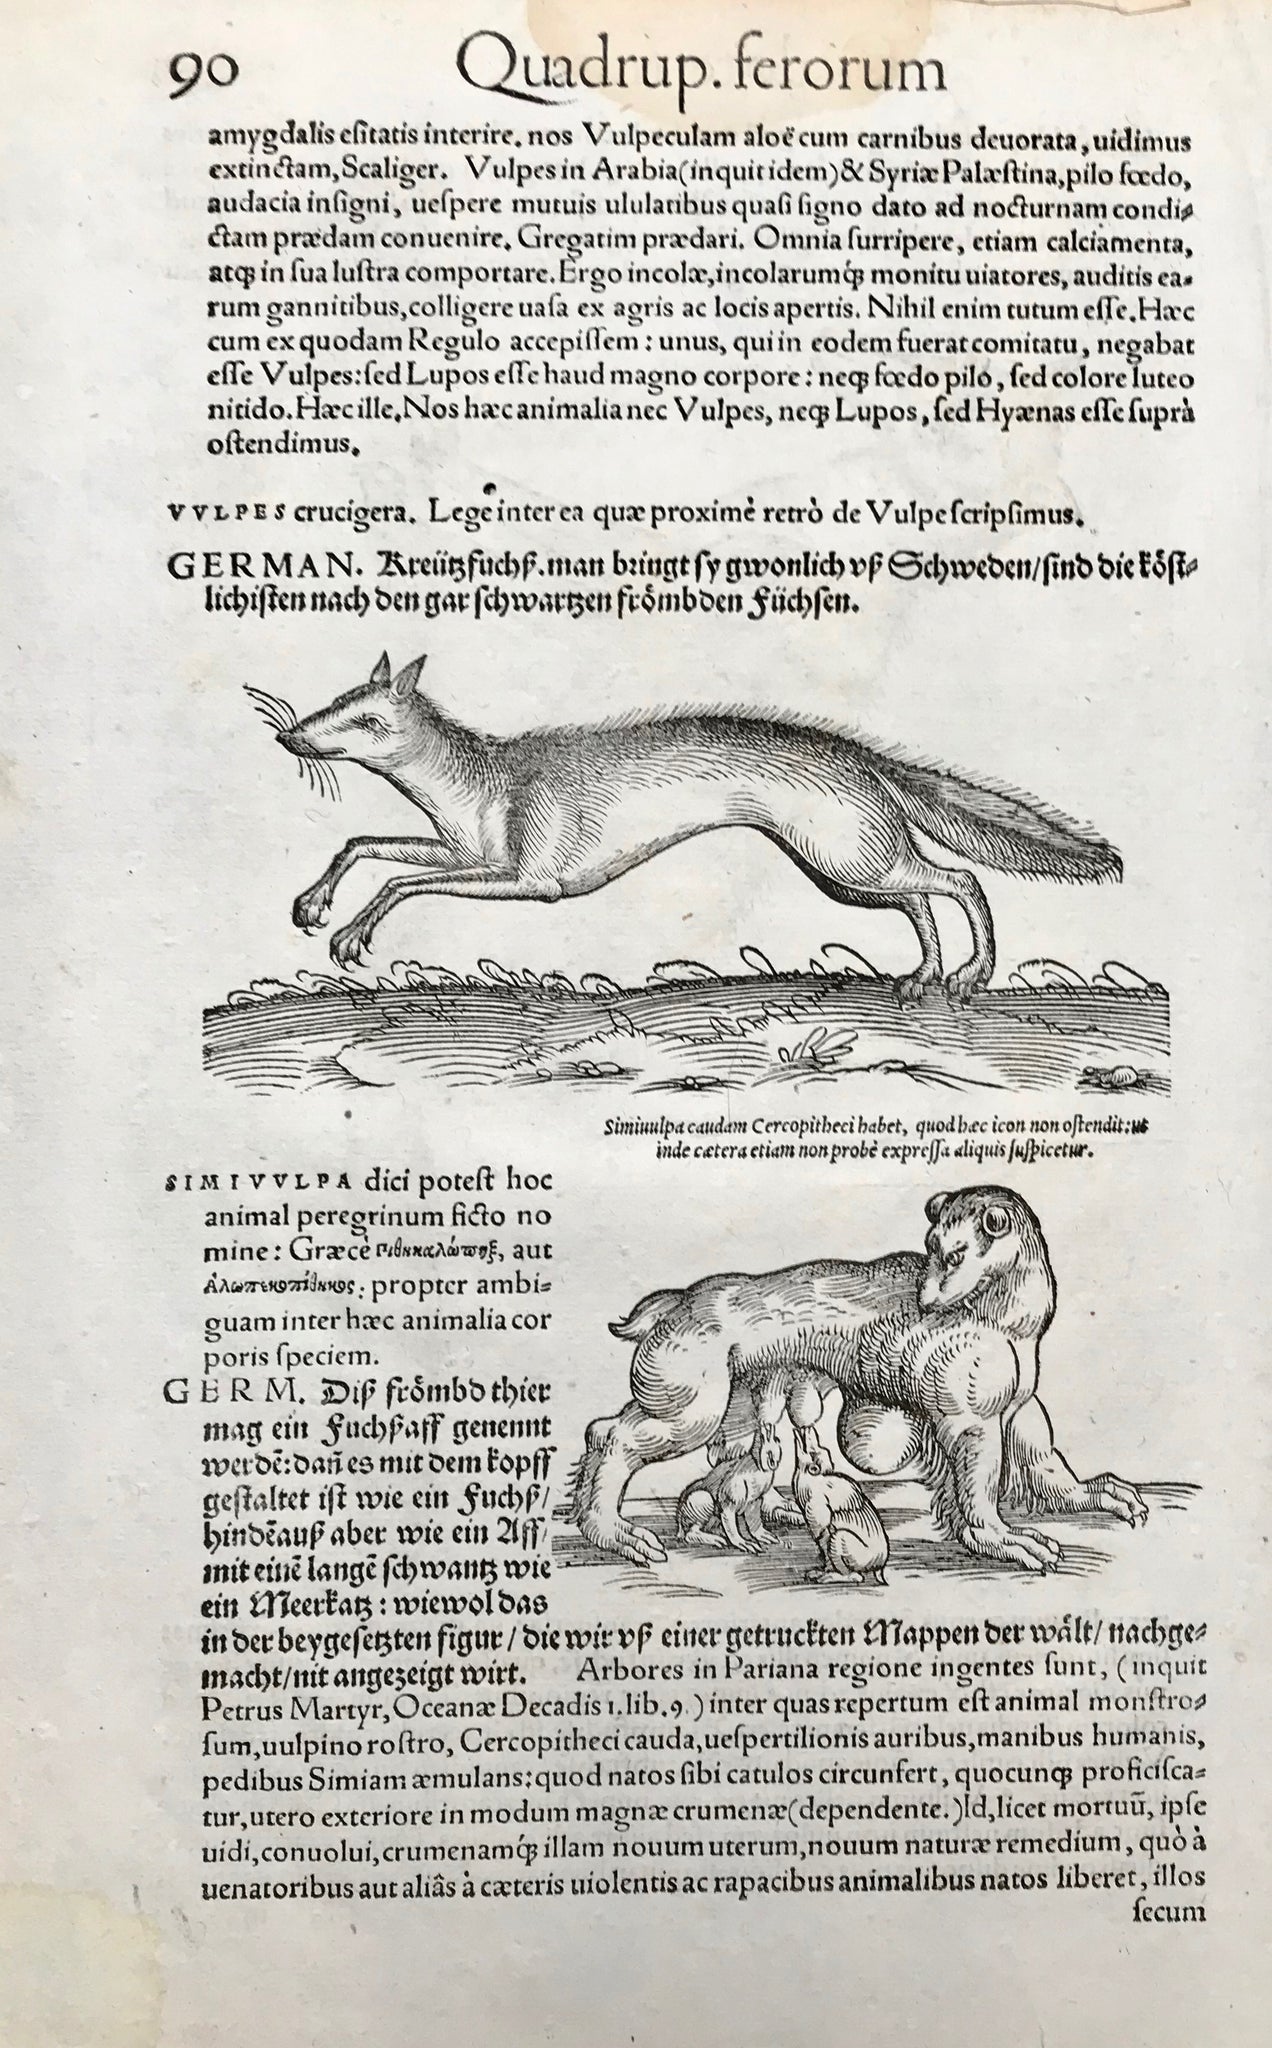 Frontside  Height of fox: 20 cm ( 7.8 ")  Reverse side Length of fox: 14 cm ( 5.5 ")  No title  Woodcuts by Pietro Andrea Mattioli ca 1570. Brown spot at top of page. A few minor scattered spots. One small wormhole in image.